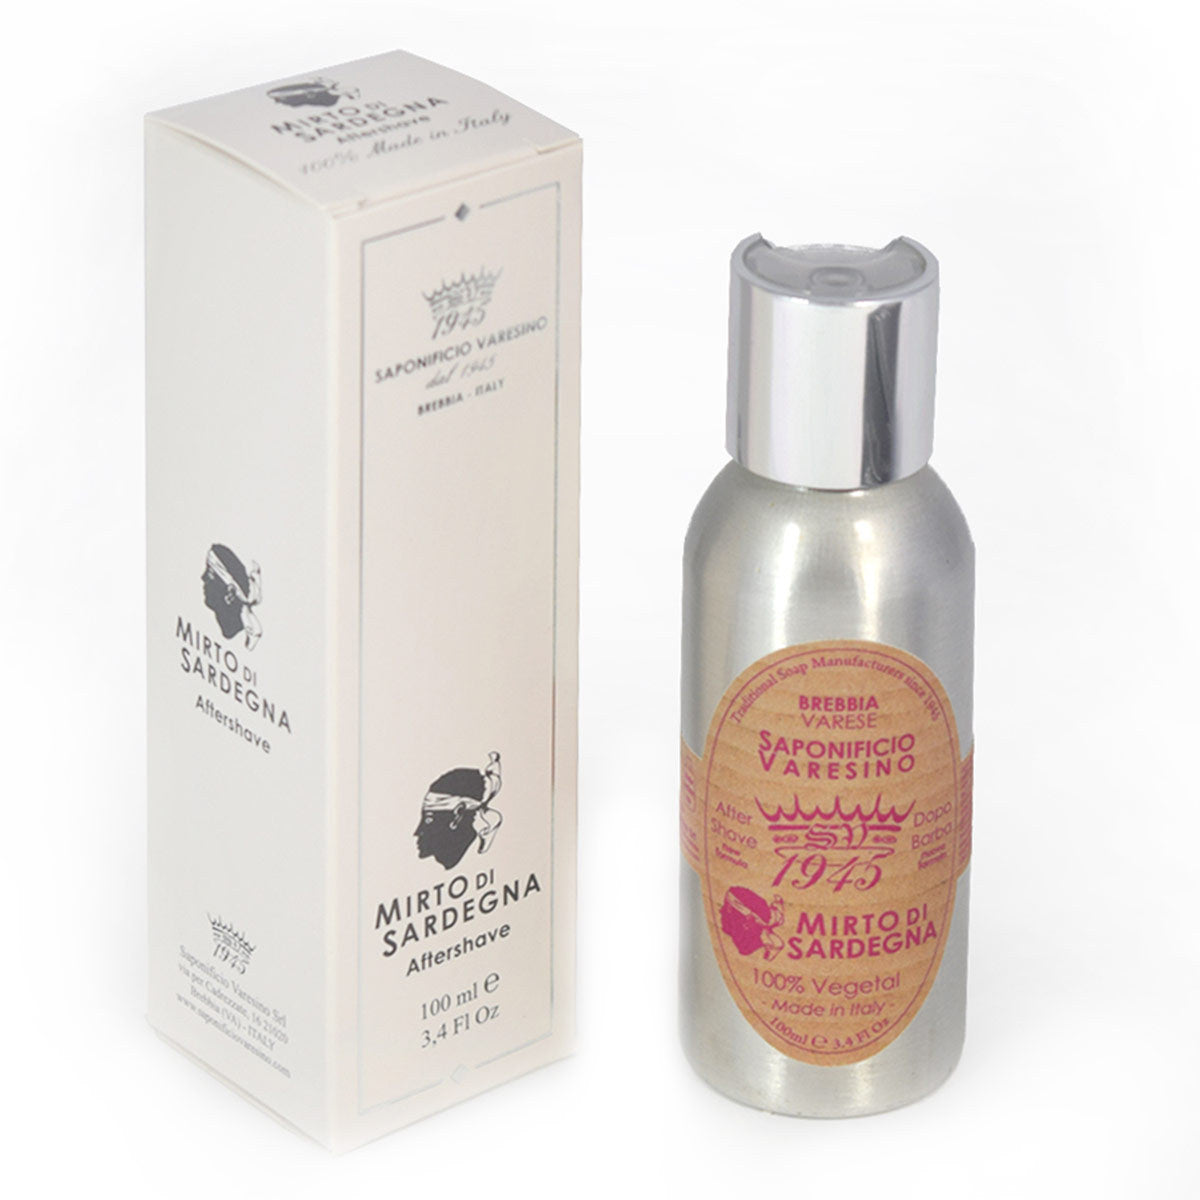 Primary image of Mirto di Sardegna Aftershave